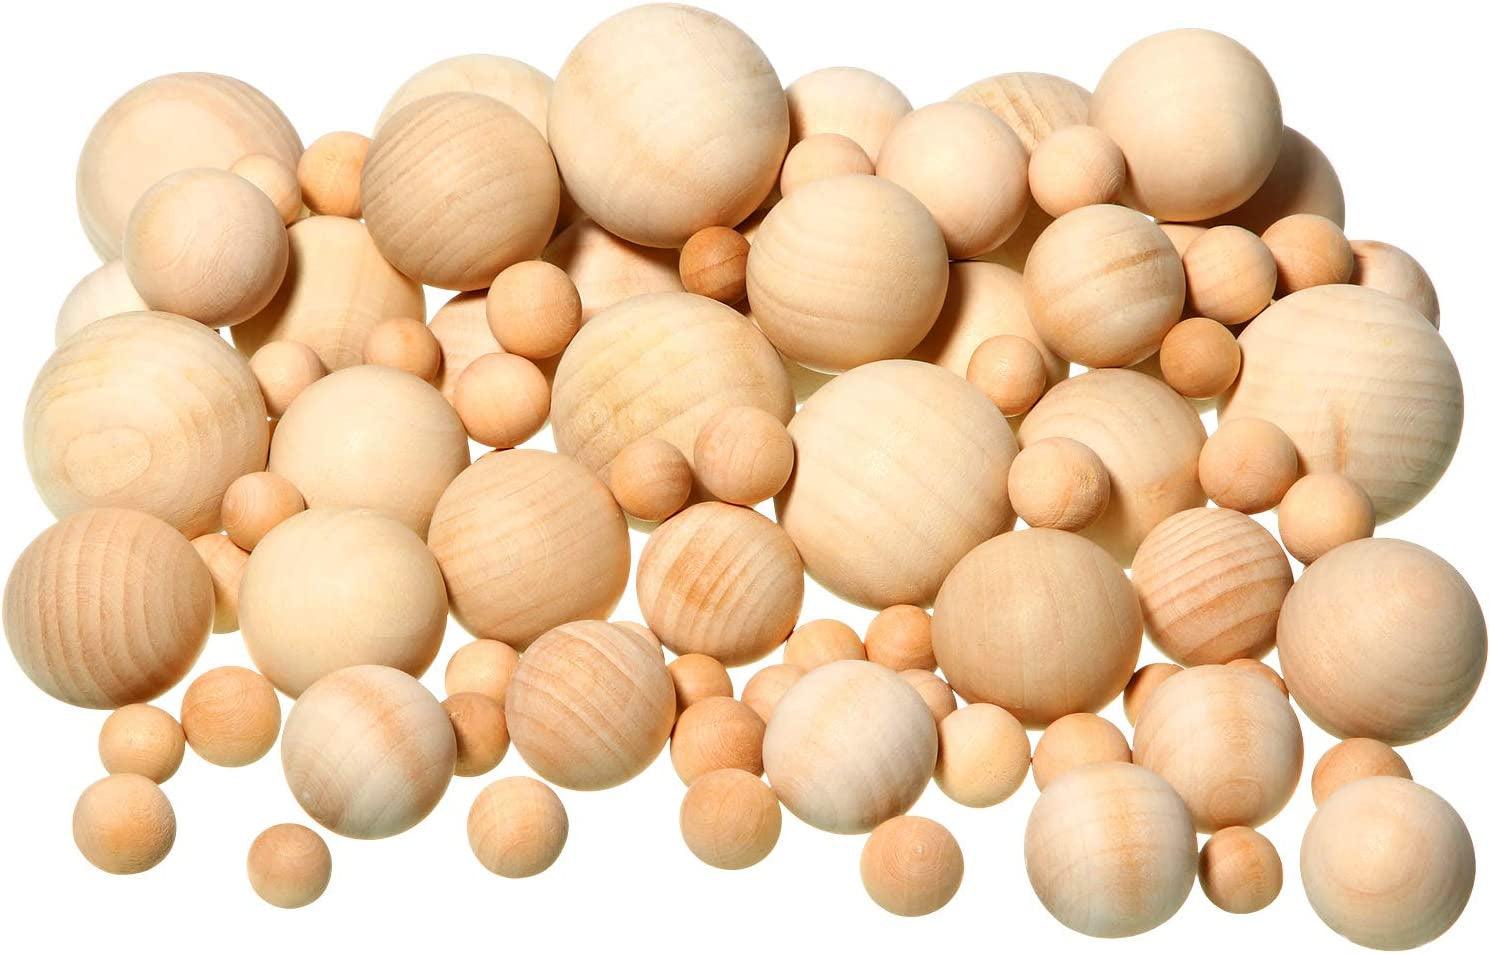 122 Pieces round Wood Balls Unfinished Wooden Balls Natural Craft Balls for  DIY Projects Jewelry Making Arts Design, 5 Sizes